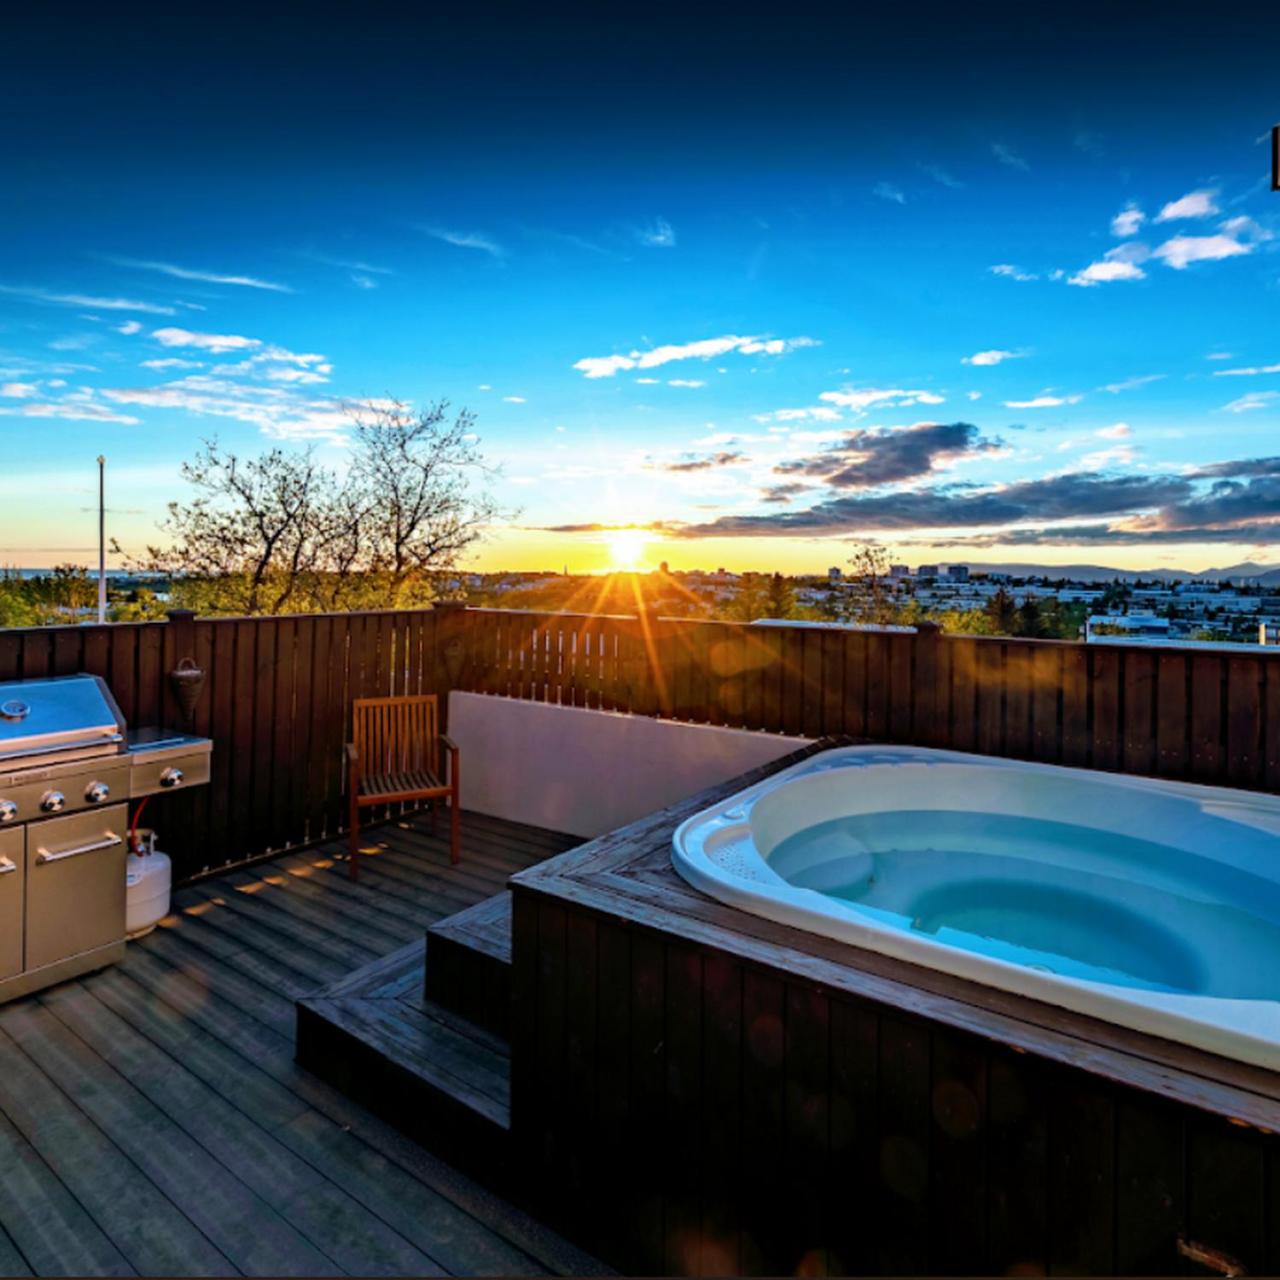 ICELAND SJF Villa , Hot tub & Outdoor Sauna Amazing Mountains View - 15 min to downtown